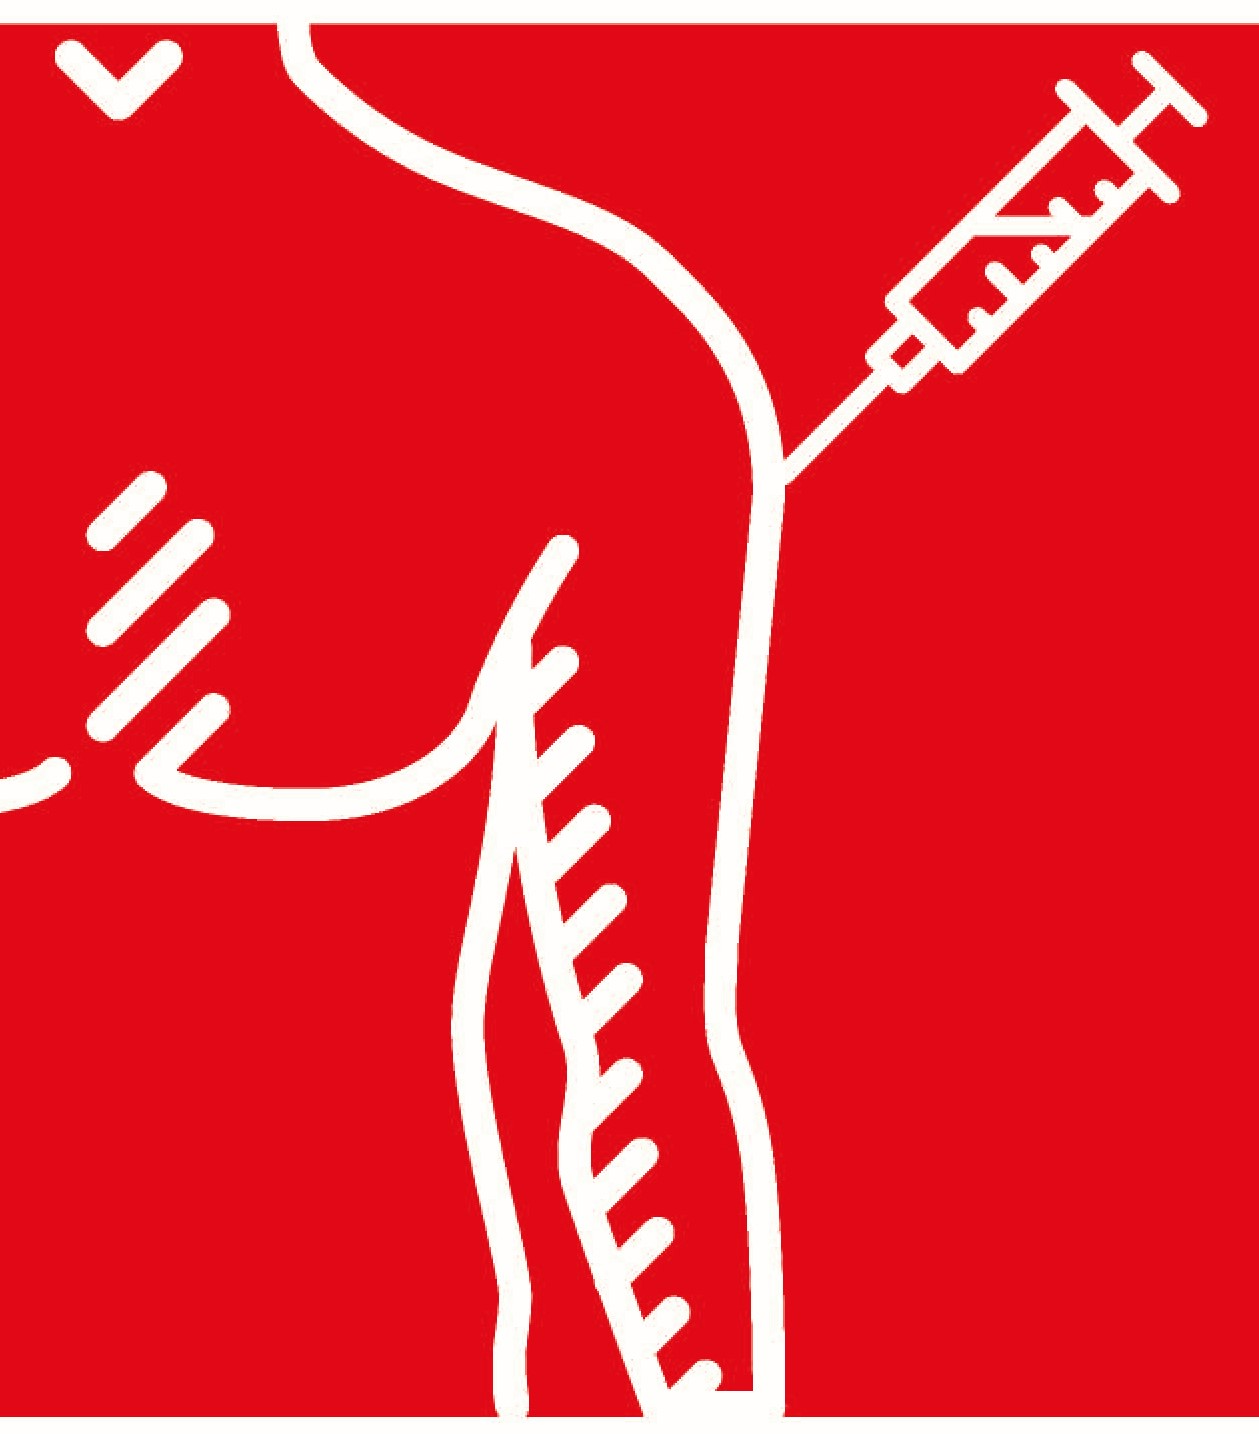 Drawn image of a torso with a syringe in the arm.